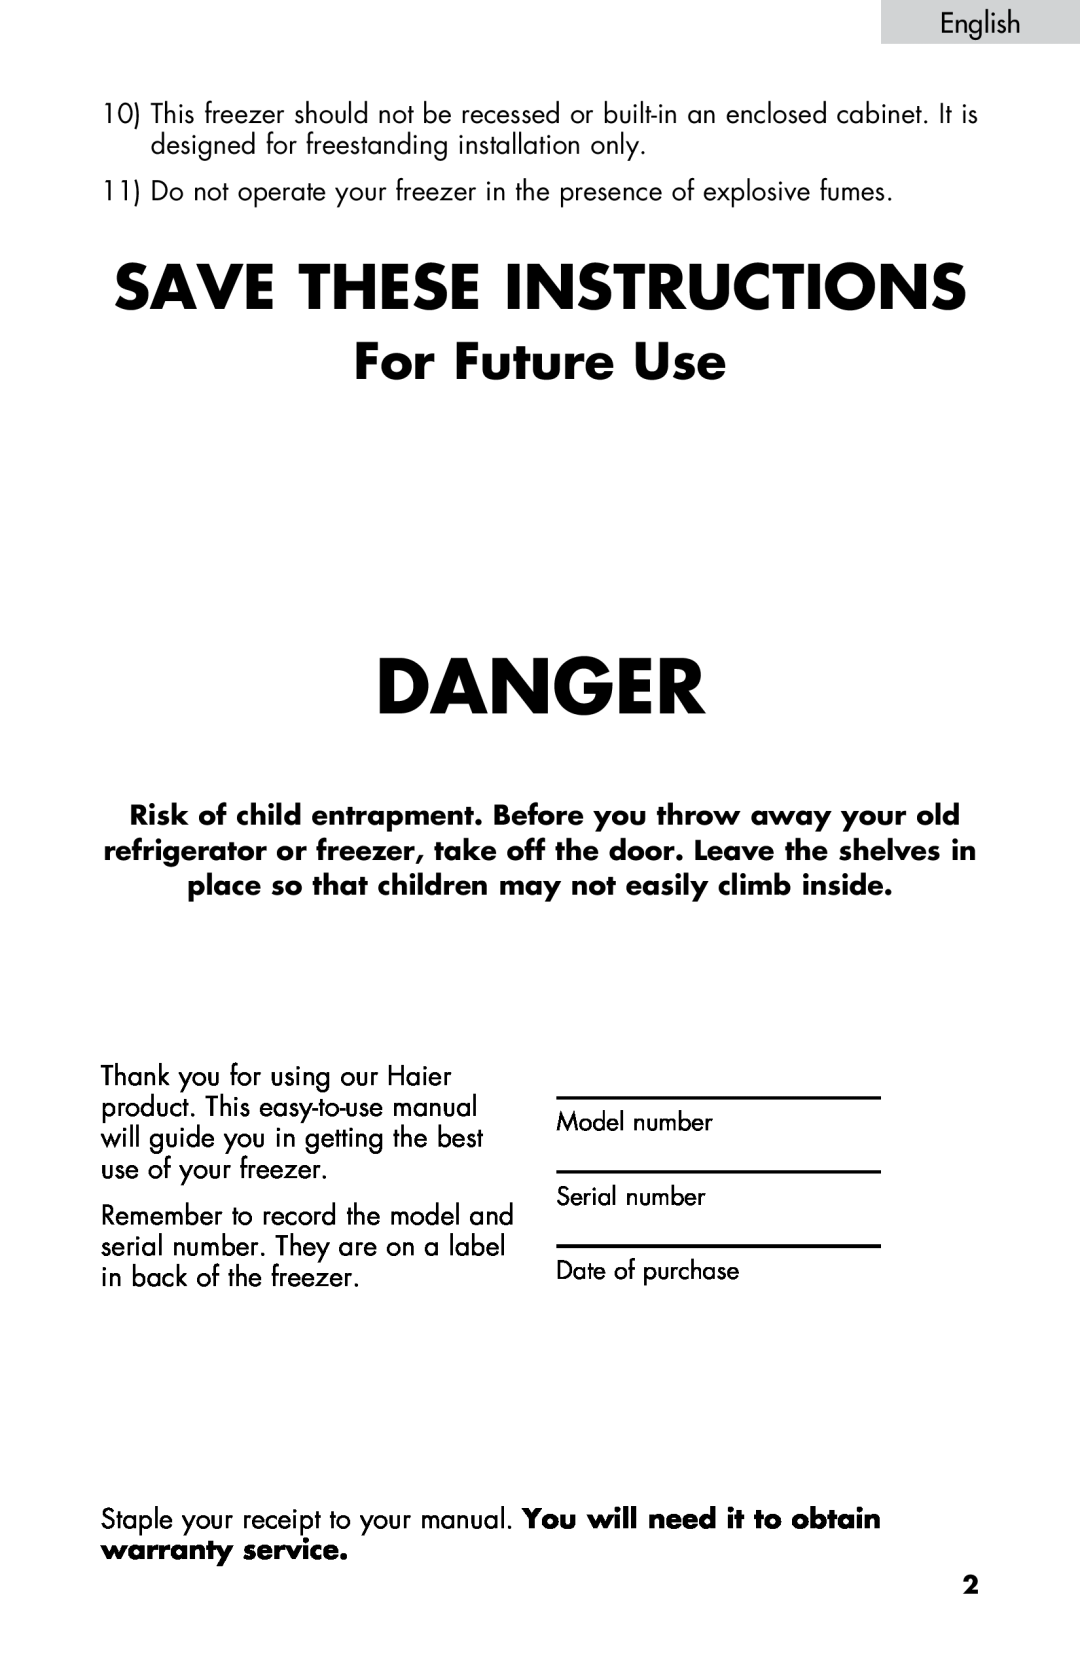 Haier LW145AW user manual Danger, Save These Instructions, For Future Use 